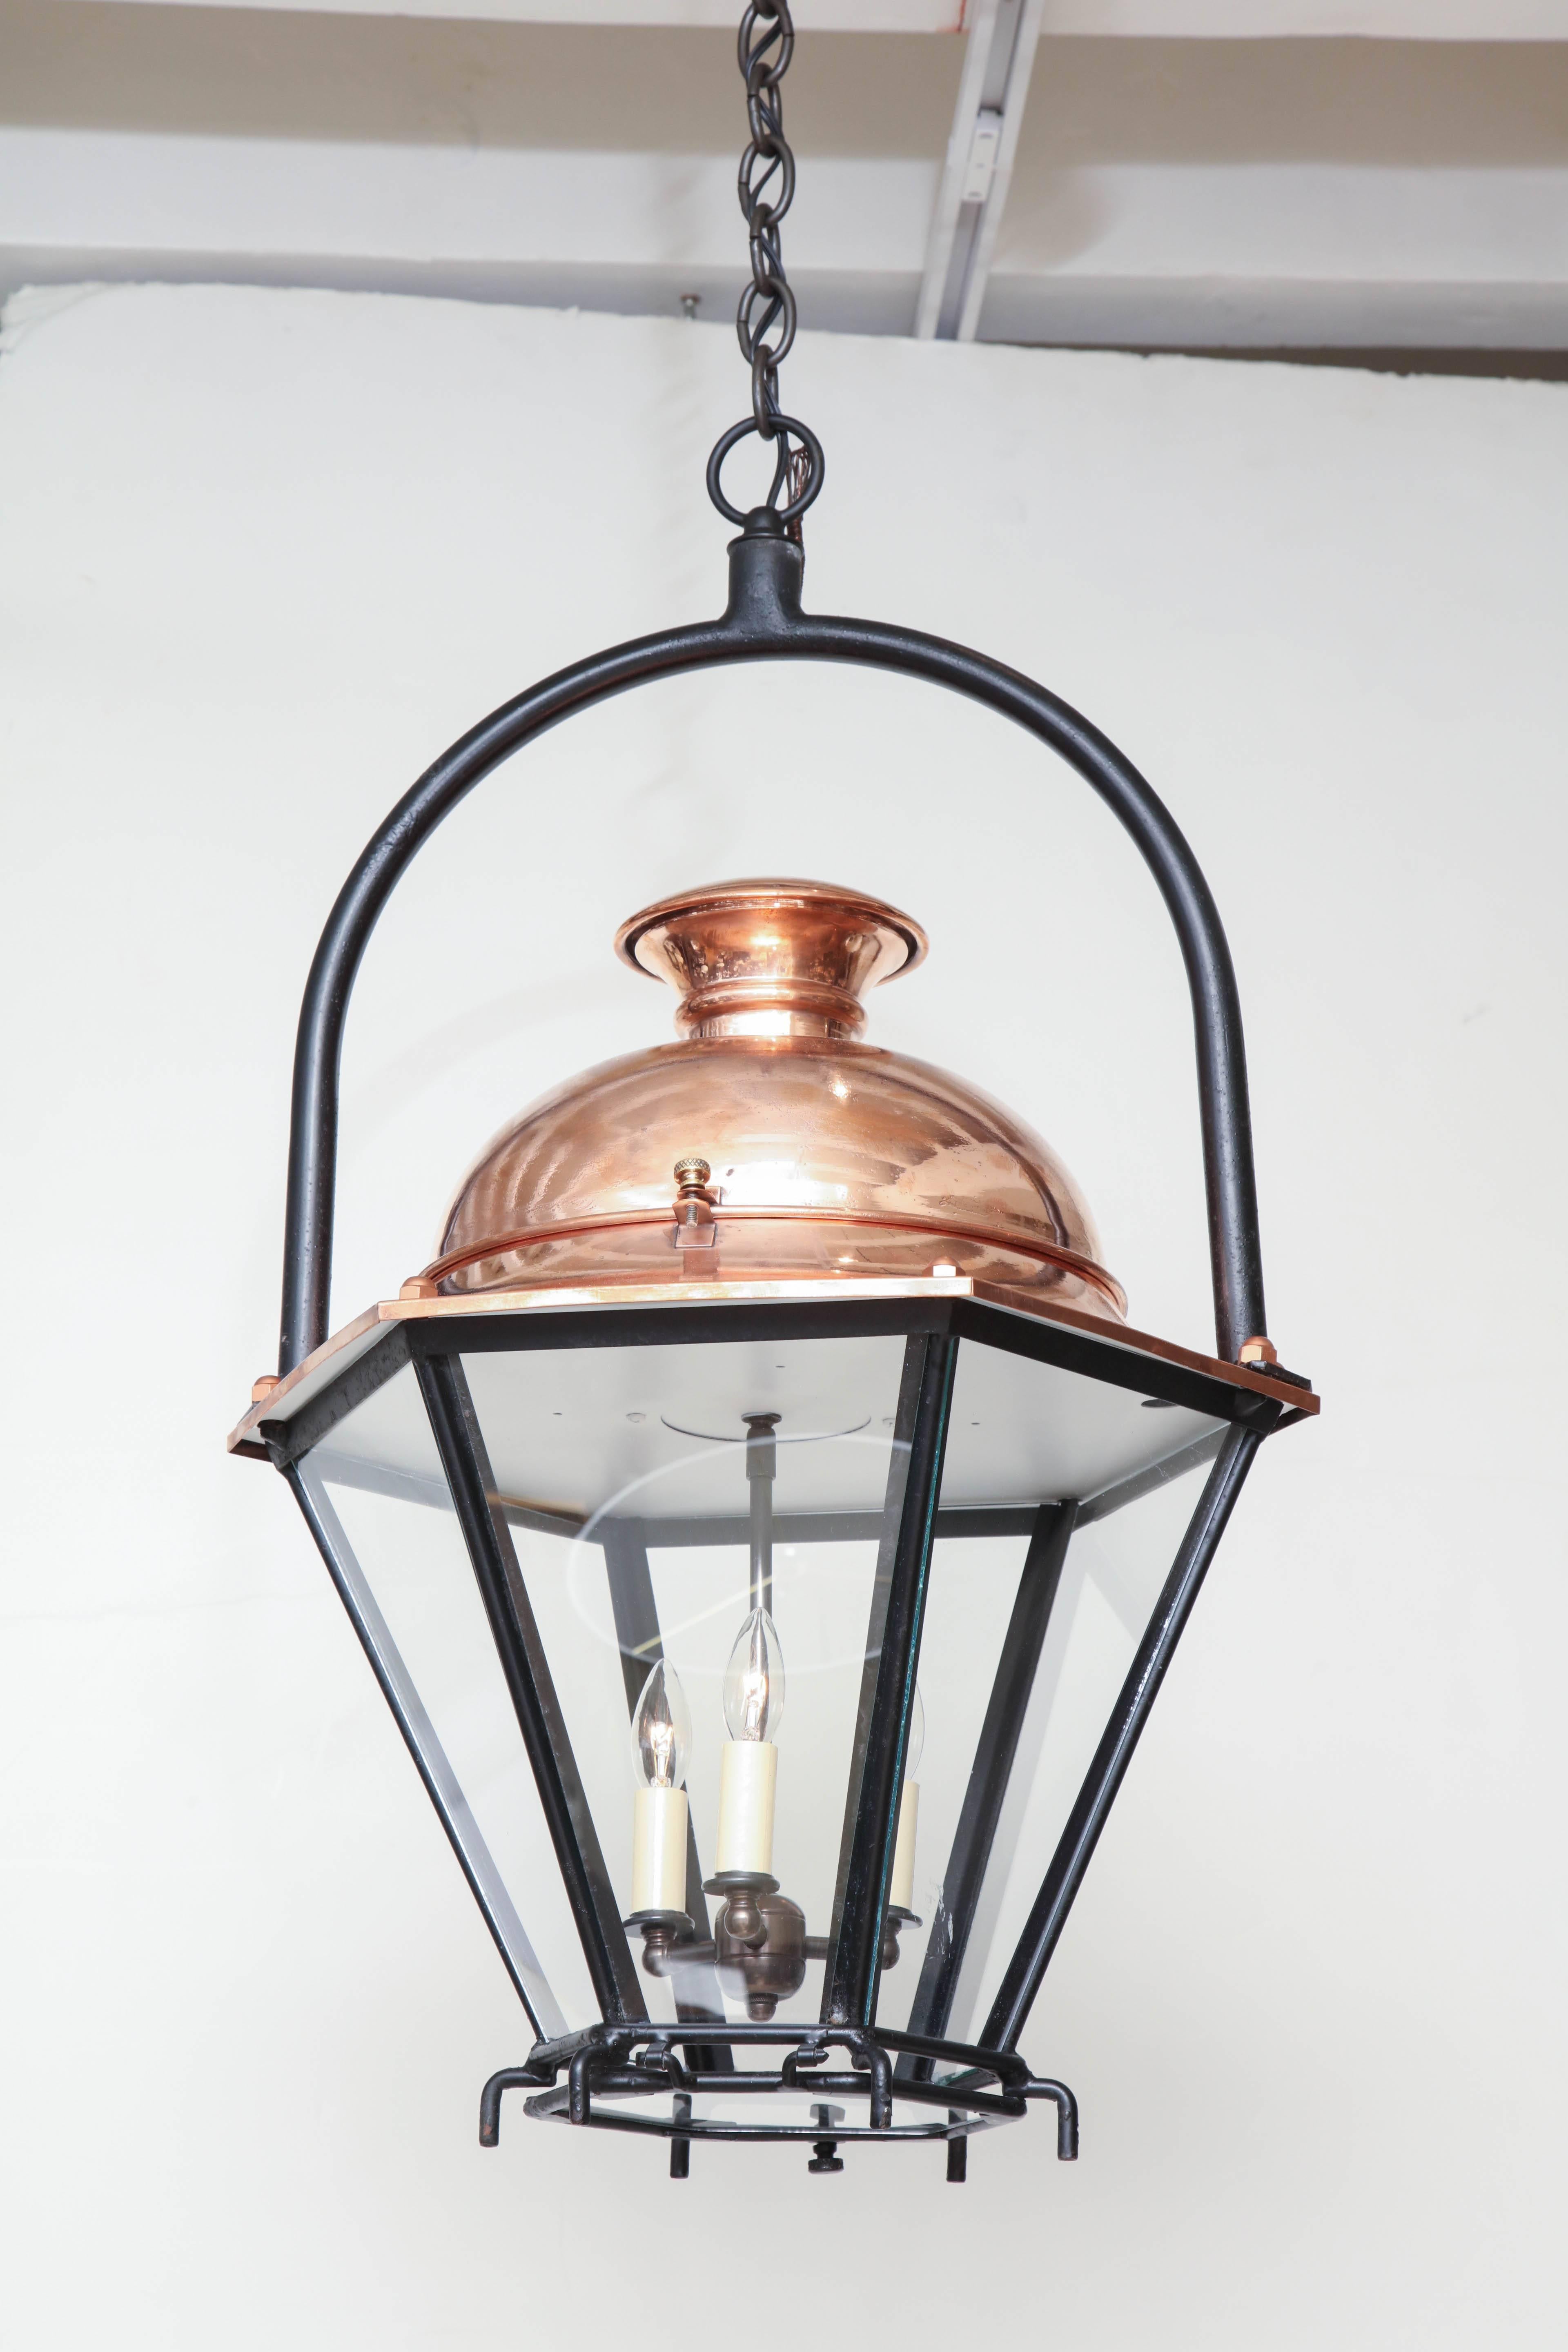 An early 20th century hexagon shaped lantern with six glass panels and a polished, unlacquered copper top. Hung from an iron ring hanger. Contains three candelabra style light sockets, recently rewired for US specifications.



Available to see in